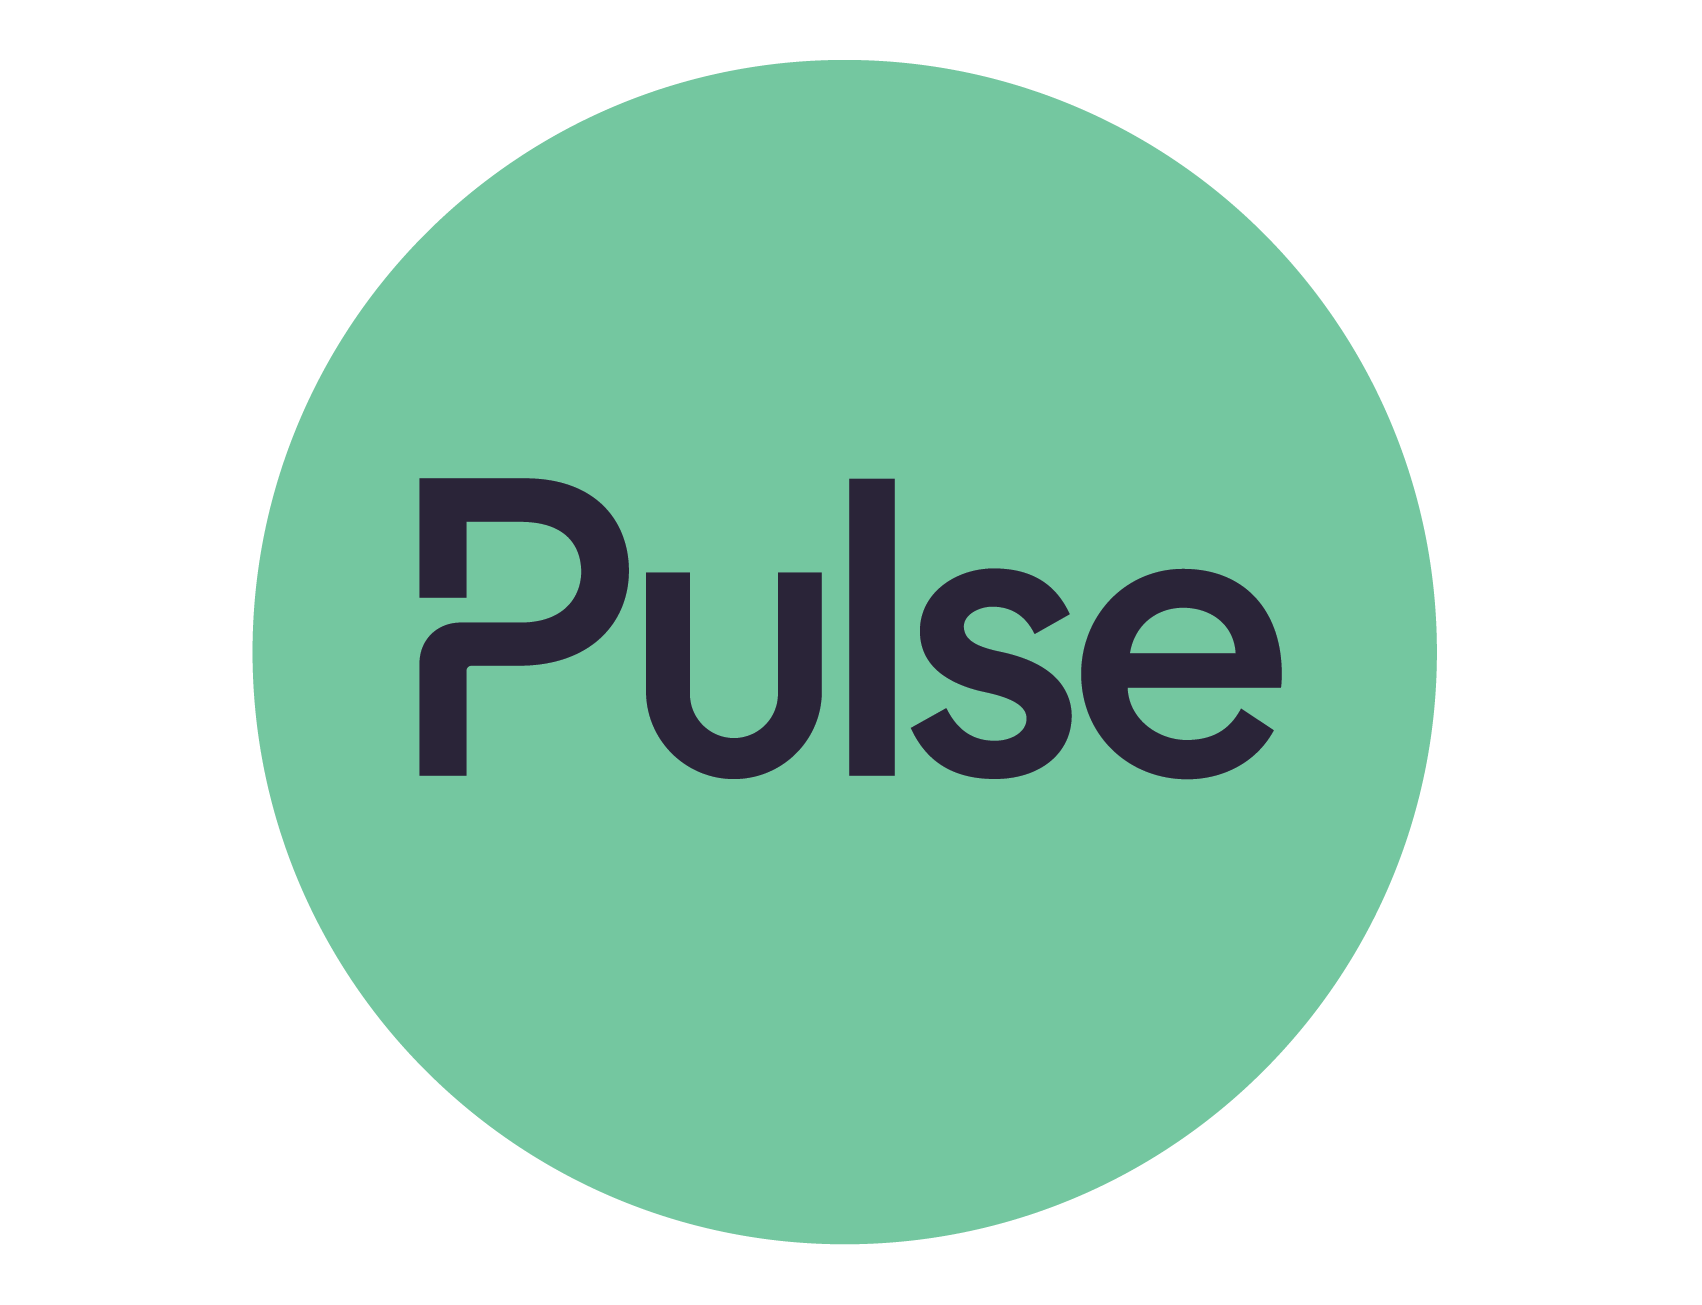 Pulse: trade mark services for startups